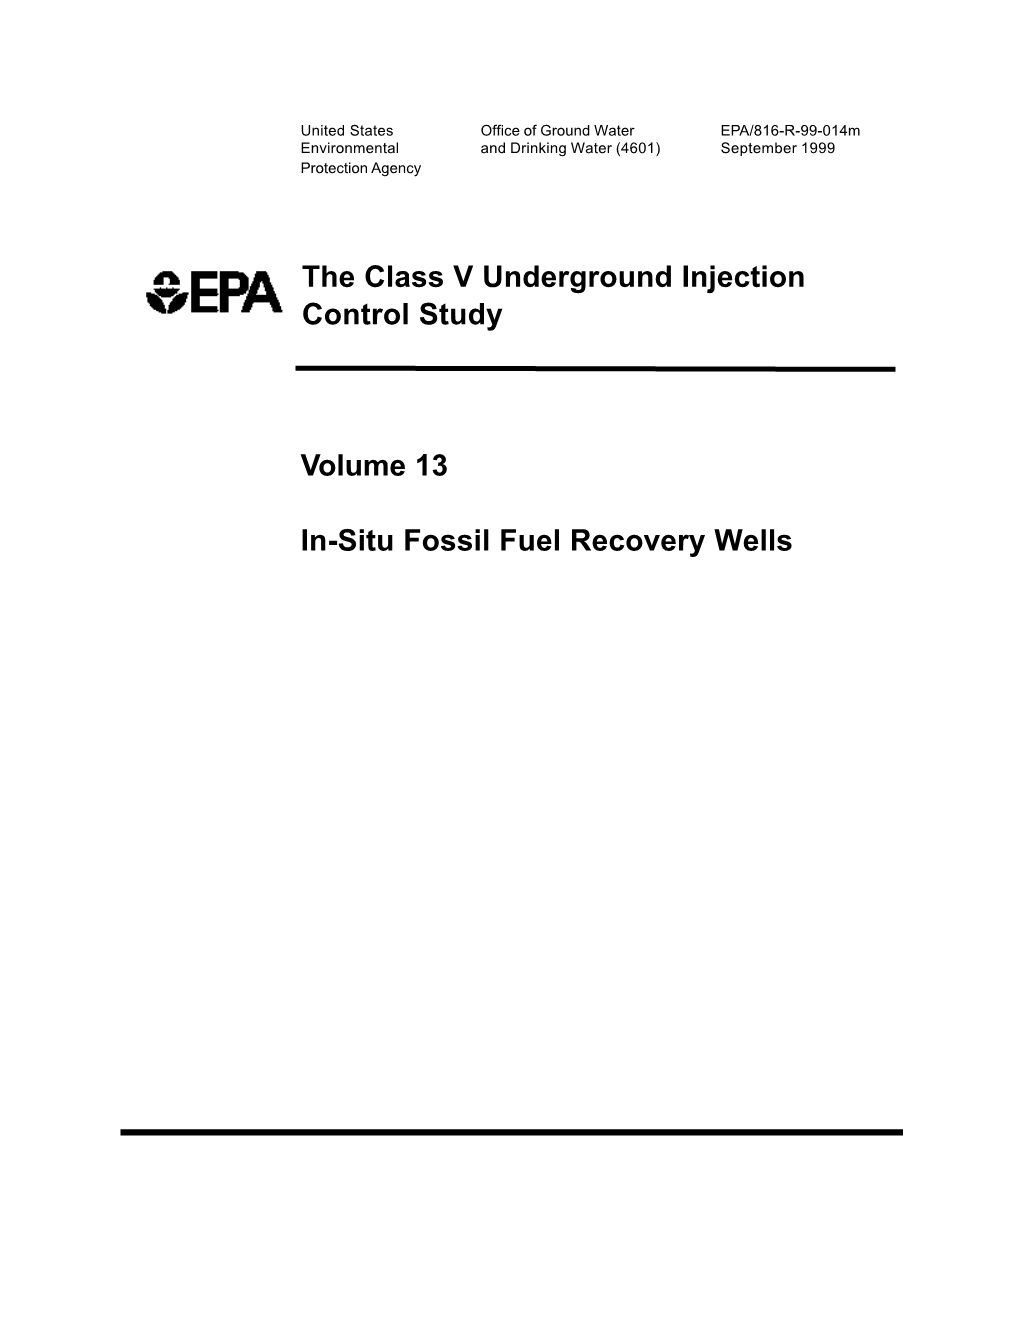 The Class V Underground Injection Control Study